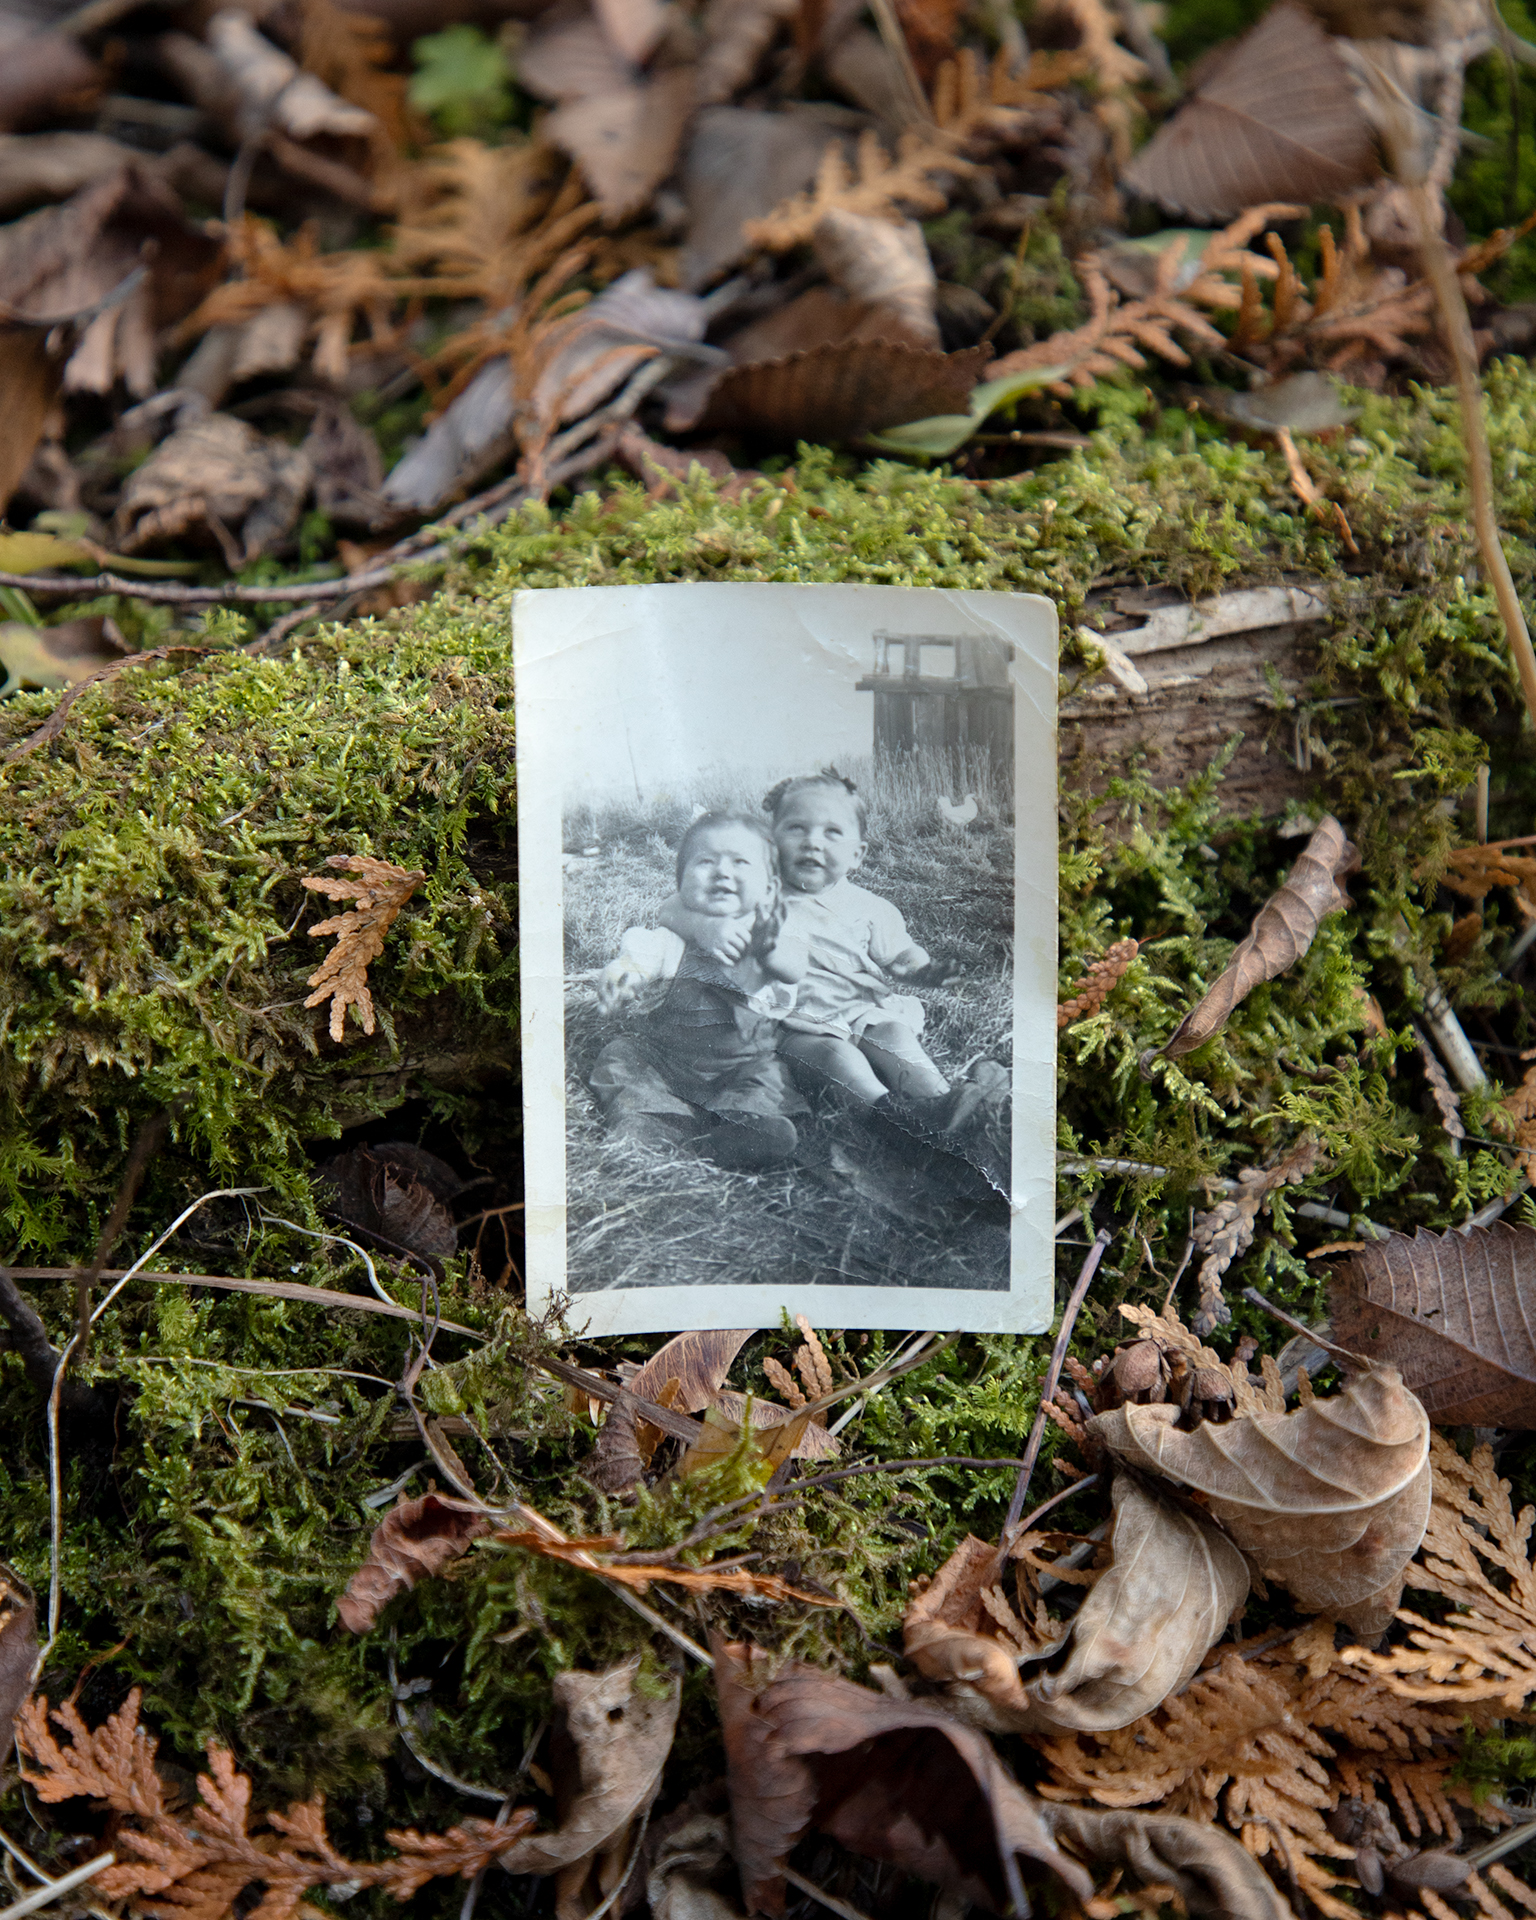 Nokomis and Rose: A colour image of a black and white archival print of the artist's grandmother and grandaunt as babies. They are both sitting in the grass, with one sister wrapping her arm around the shoulder of her younger sibling. The girl on the left is wearing dark overalls, a white shirt and boots, and the girl on the right is wearing a white dress and boots. A dilapidated wooden shack and a chicken can be seen in the top right hand corner. The archival image is placed in the center of the forest floor with a log covered in moss. There are dried fallen leaves and Cedar that has turned orange surrounding the image.